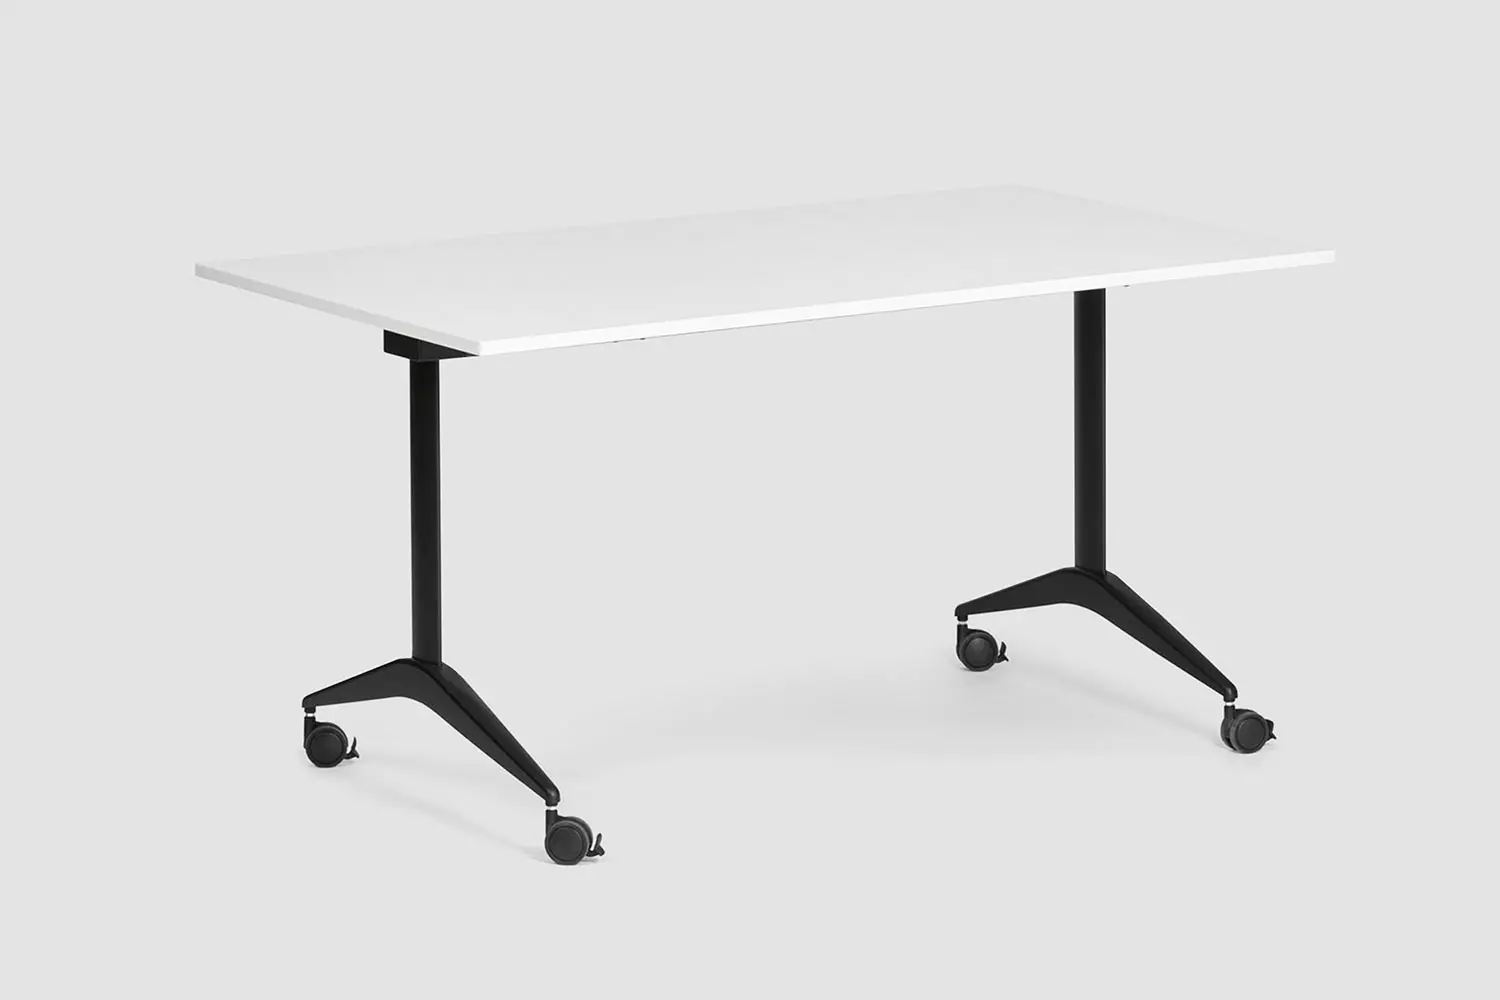 flex-schwenktisch-bold, Foldable or collapsible  Seating height Meeting table, Bene Office furniture, Image 1